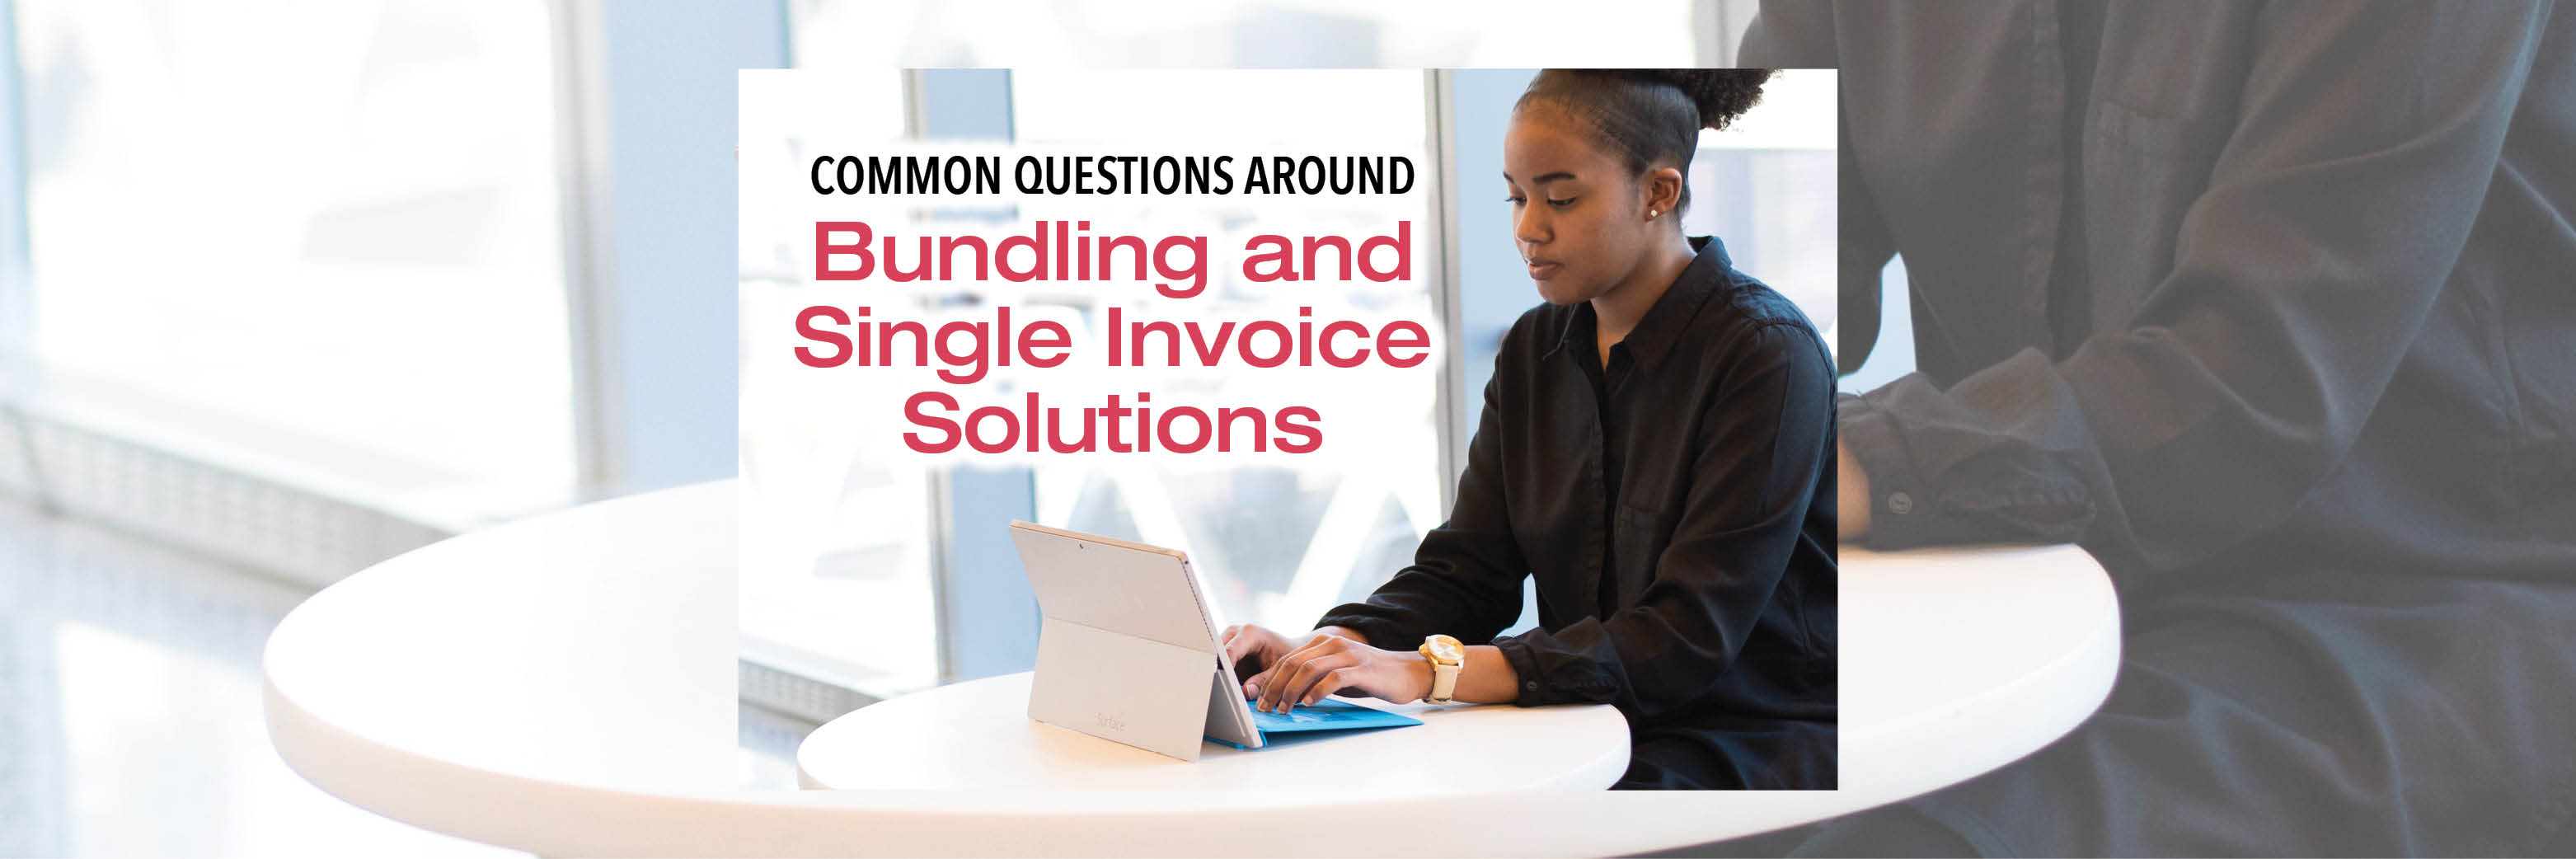 Common Questions Around Bundling and Single Invoice Solutions